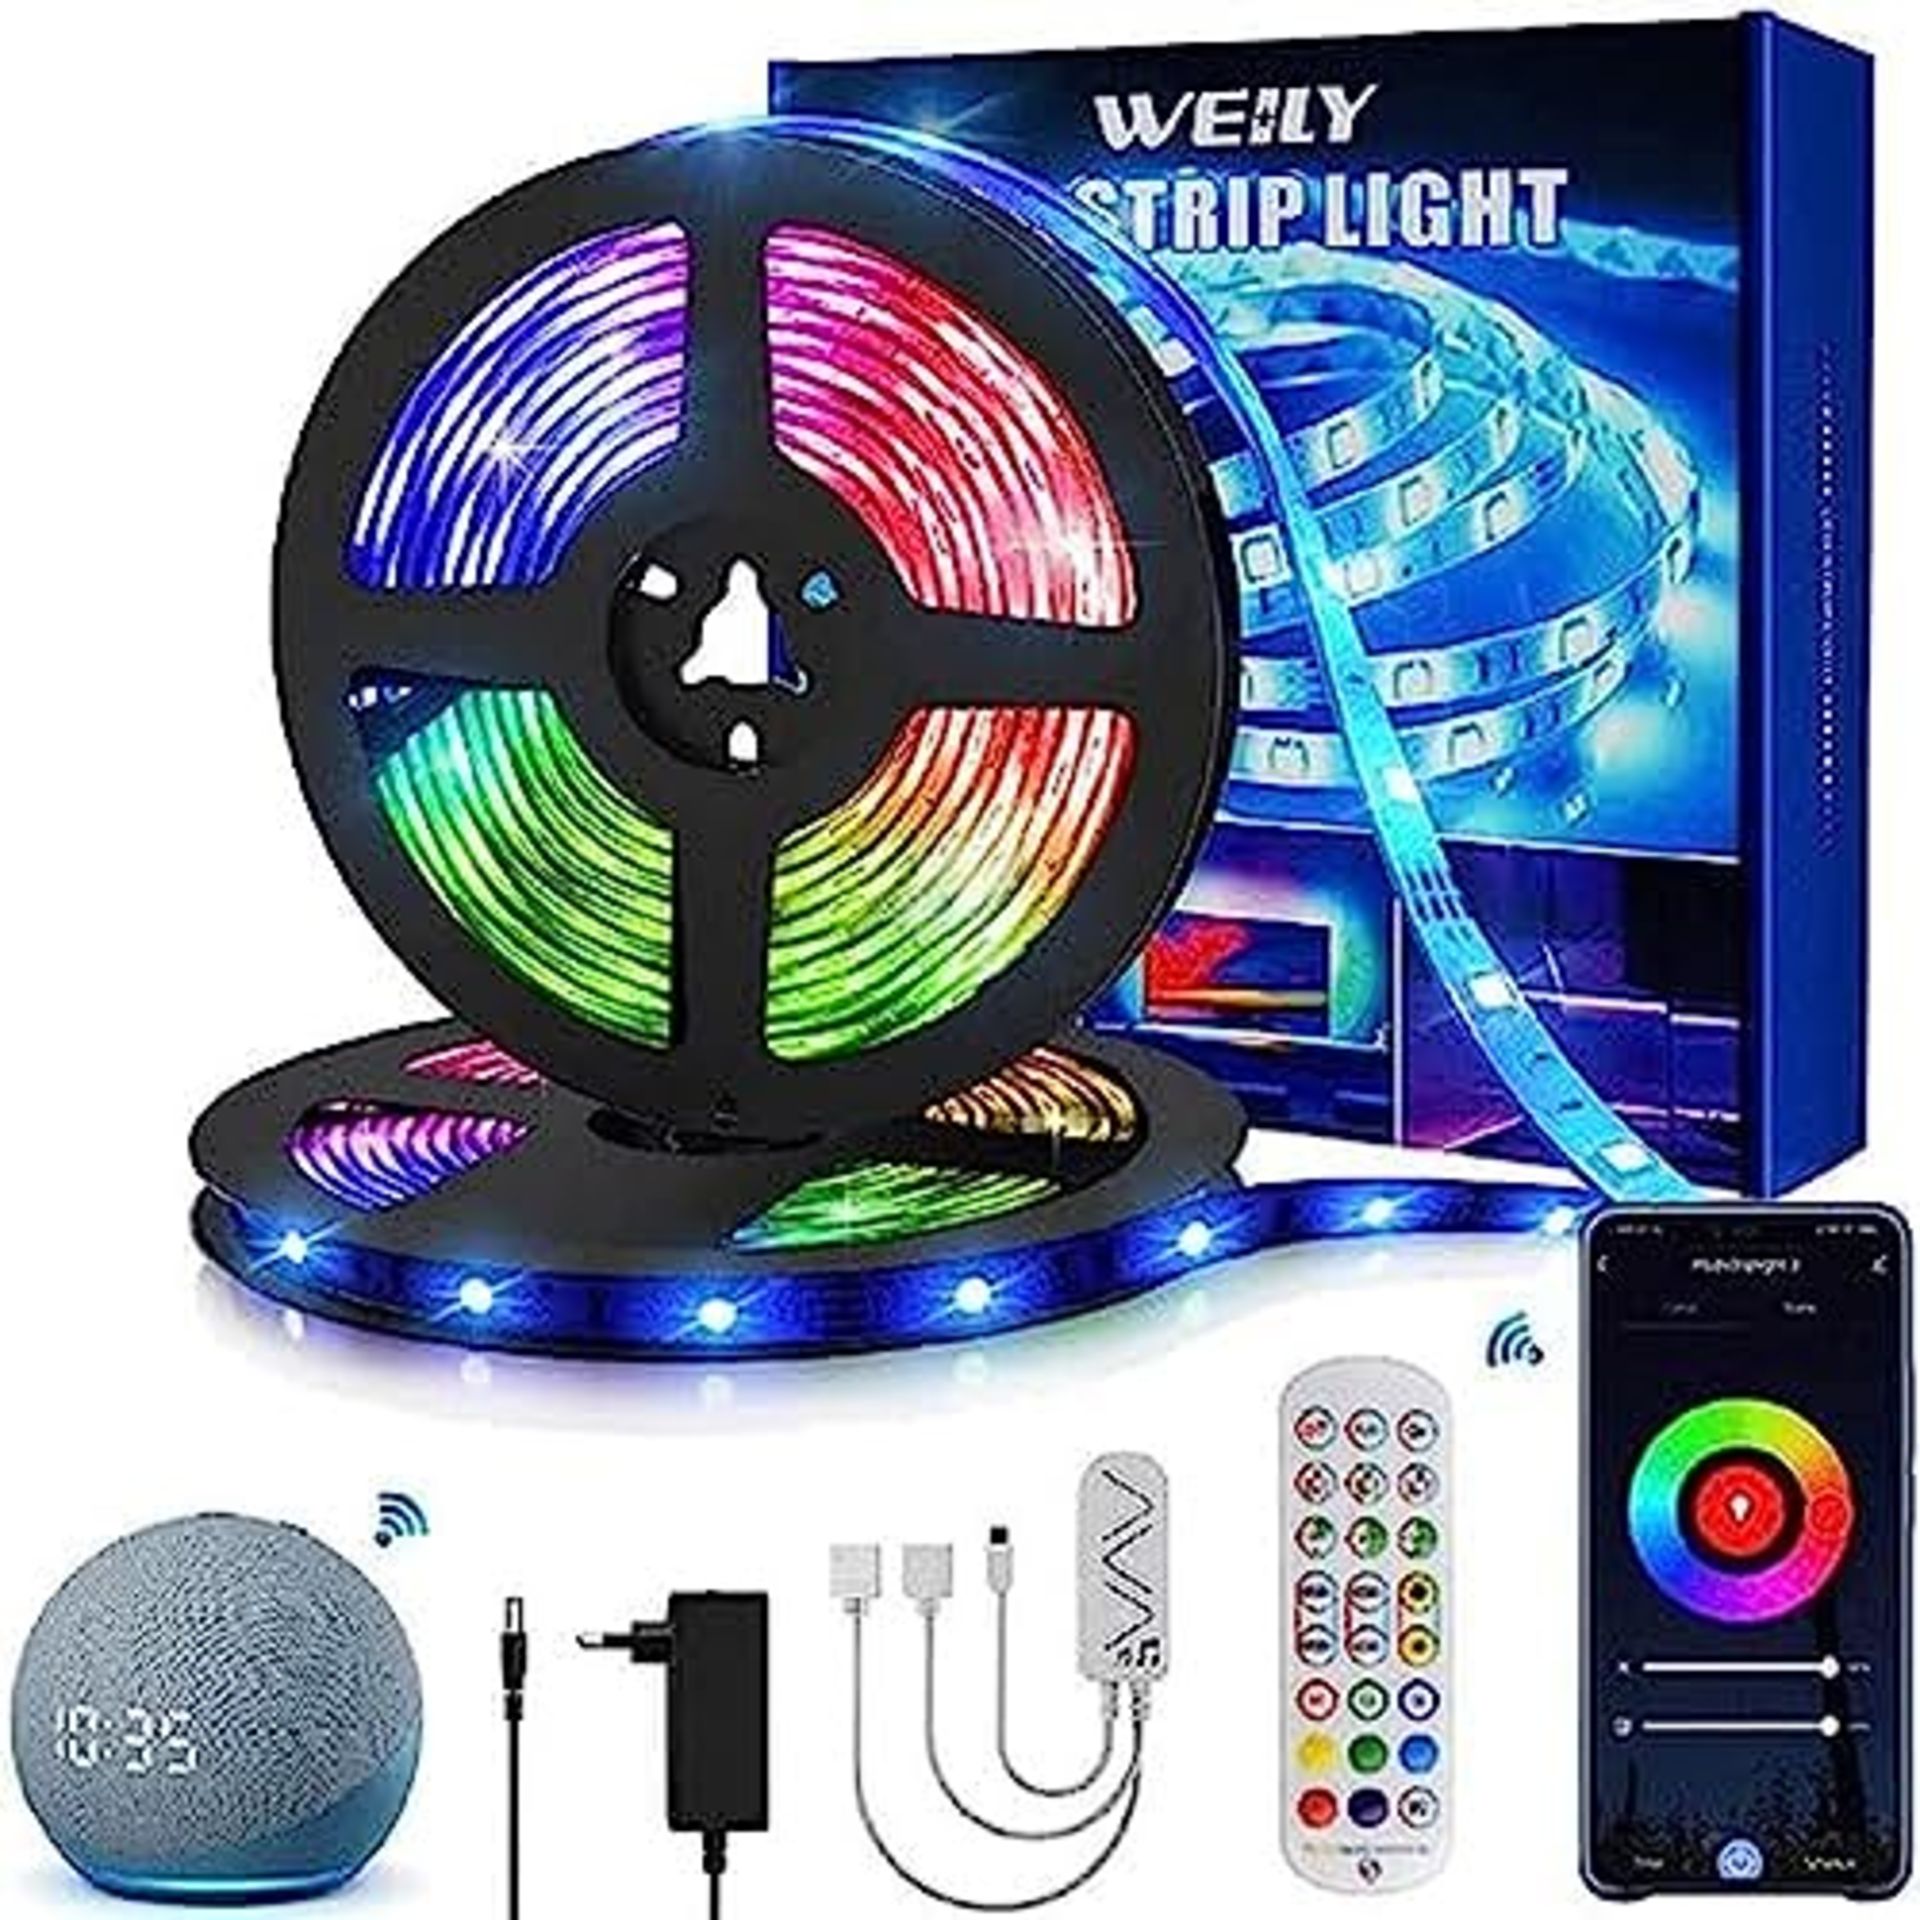 15M LED Strips, WEILY 15M RGB Colorful LED Room Lights Remote Control Music LED Strips - Image 4 of 6